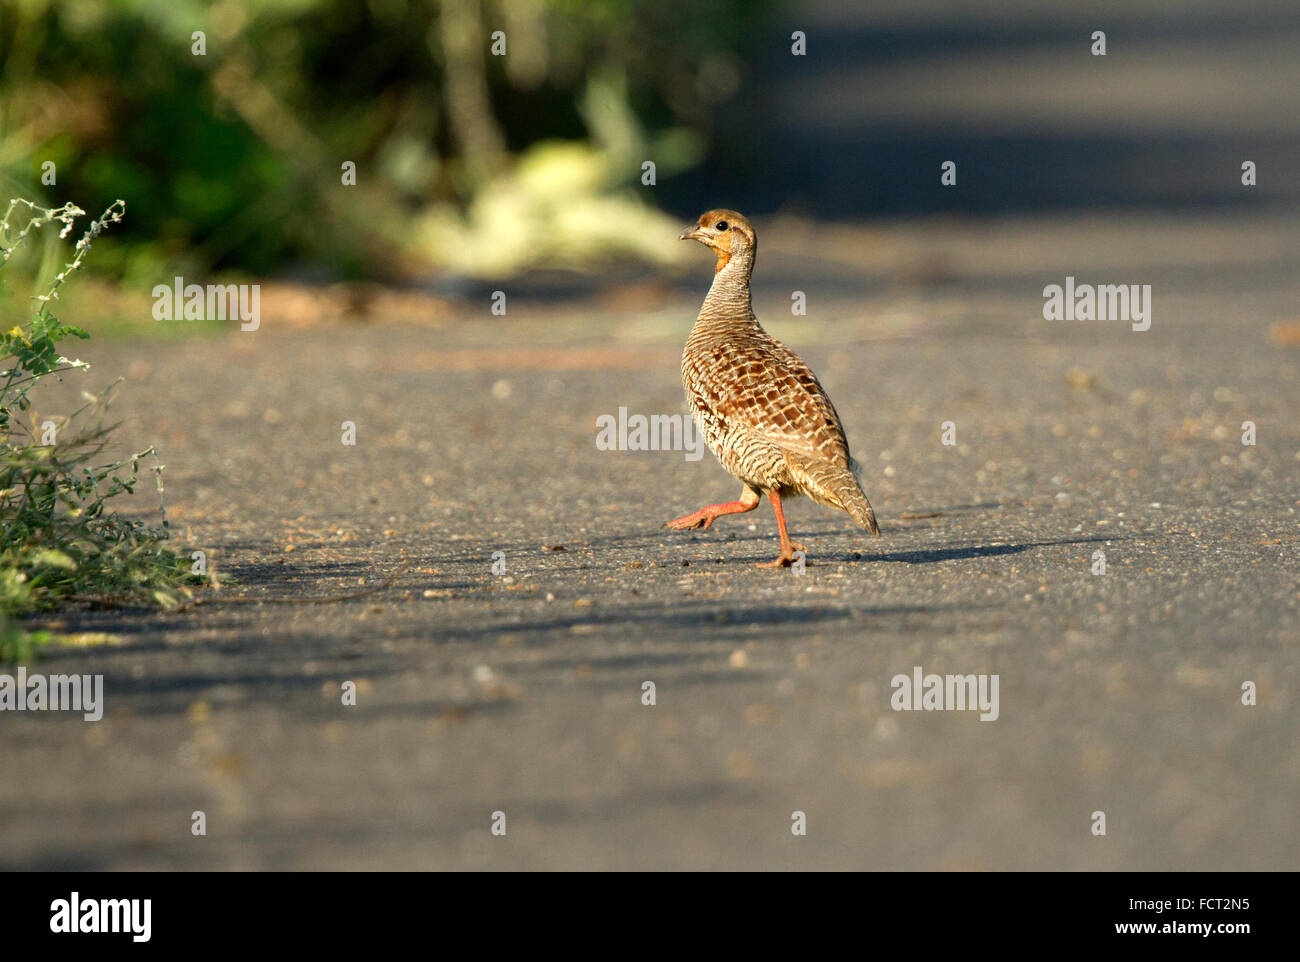 The grey francolin Francolinus pondicerianus is a species of francolin found in the plains and drier parts of South Asia. Stock Photo